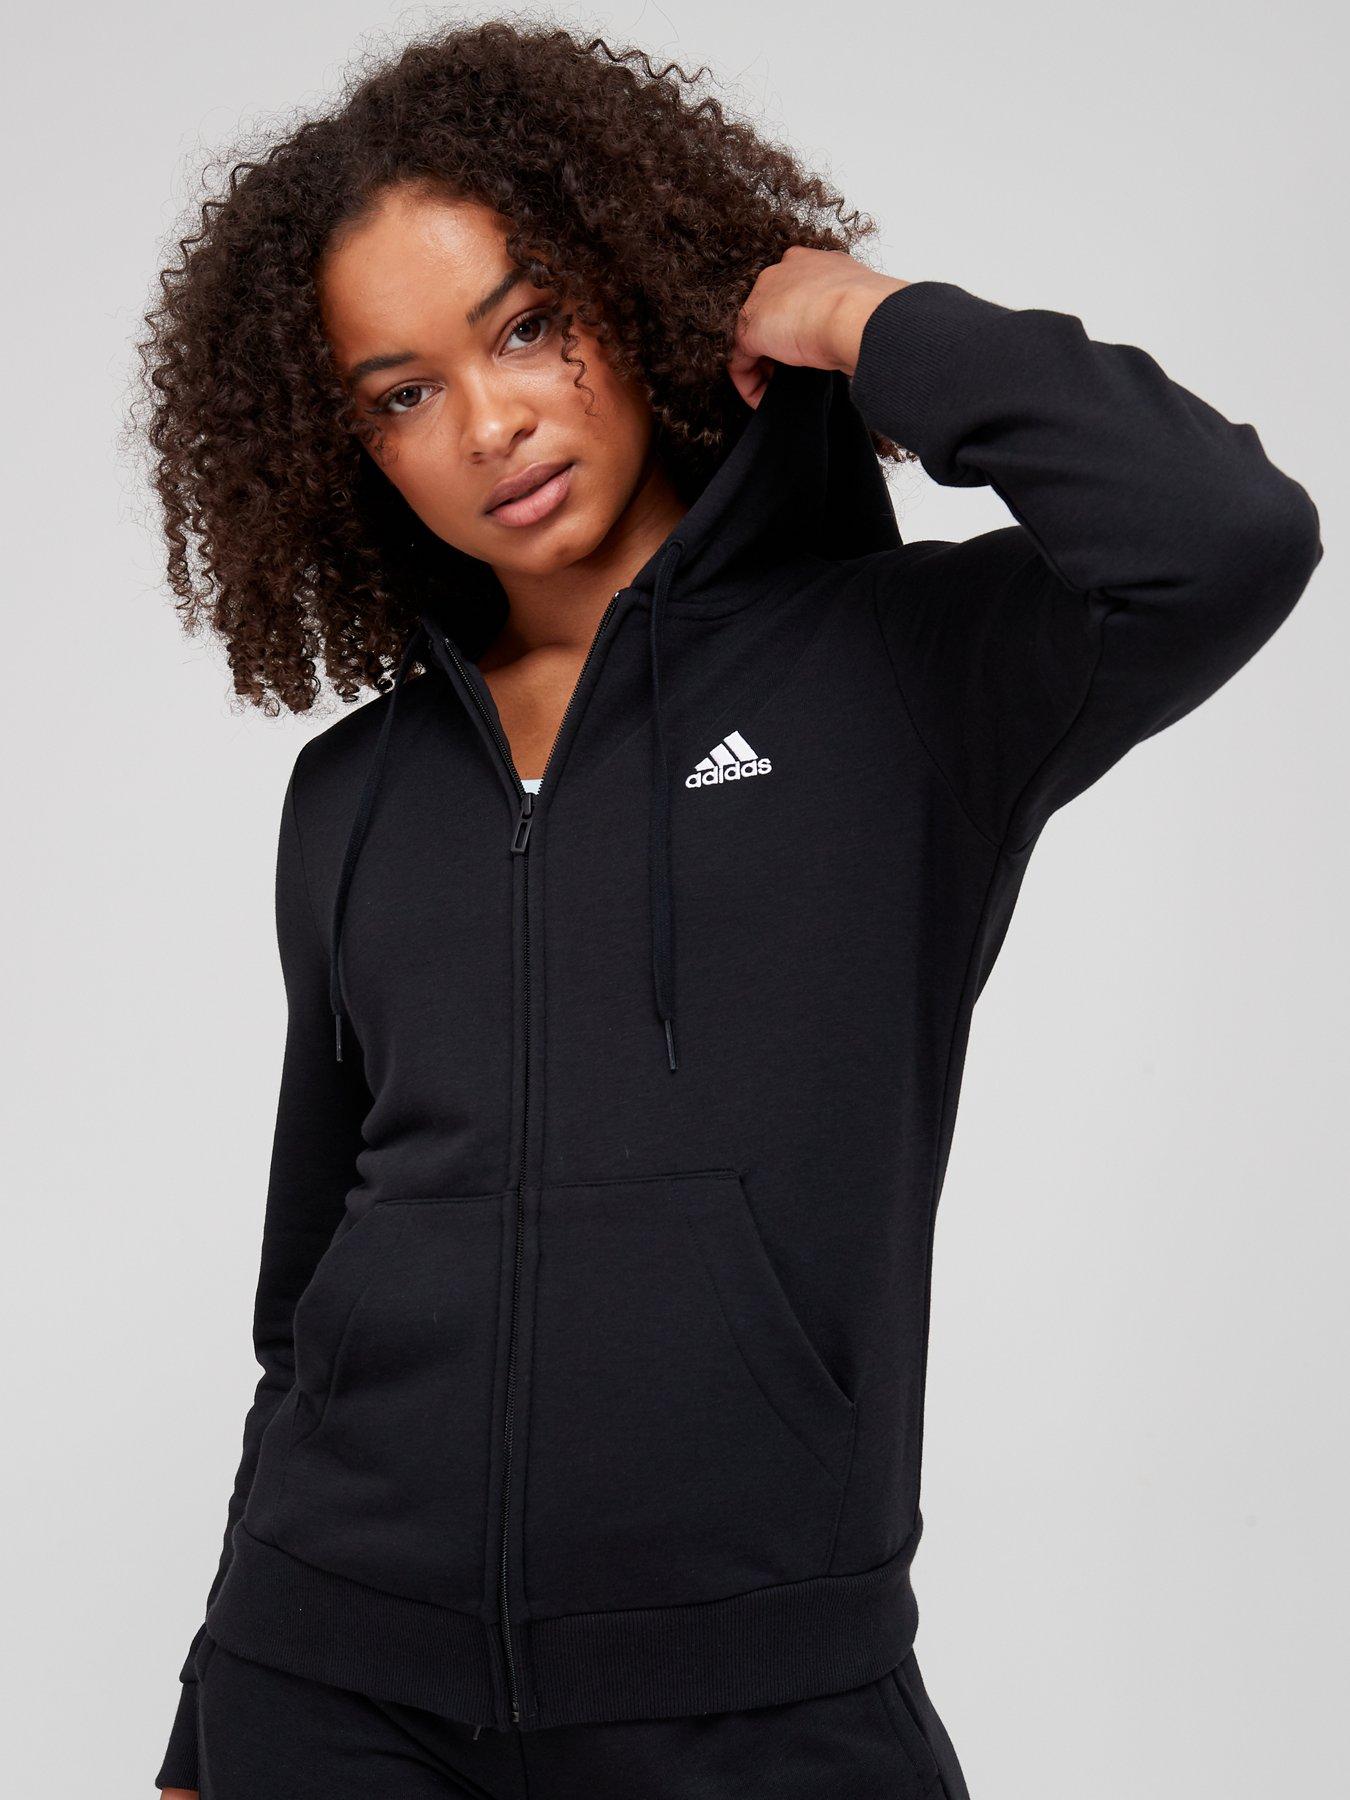 adidas Sportswear Essentials Linear Full-zip French Terry Hoodie - Black/White very.co.uk